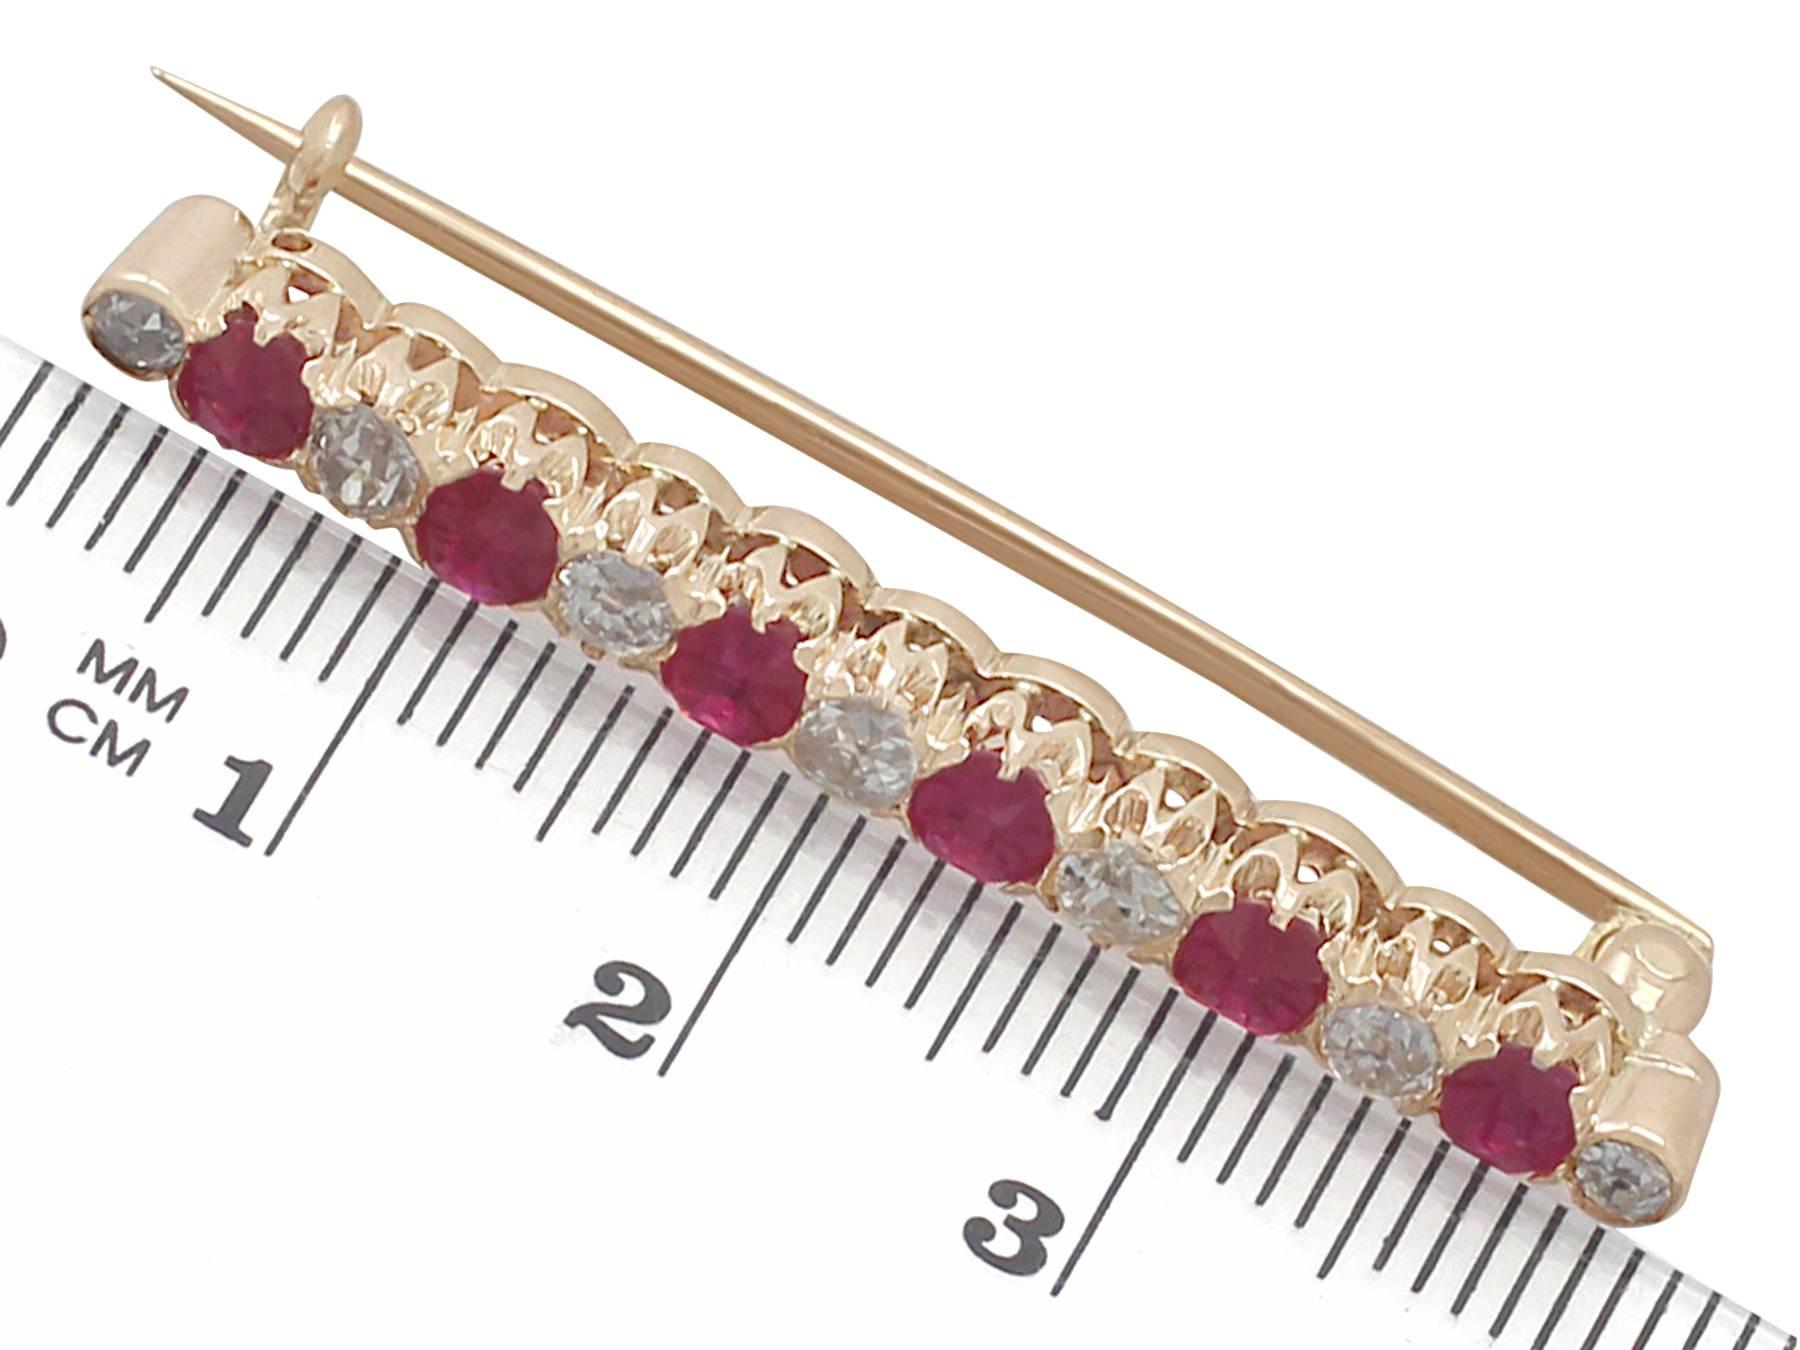 1.48Ct Ruby and 0.85Ct Diamond, 14k Rose Gold Bar Brooch - Antique Victorian 3